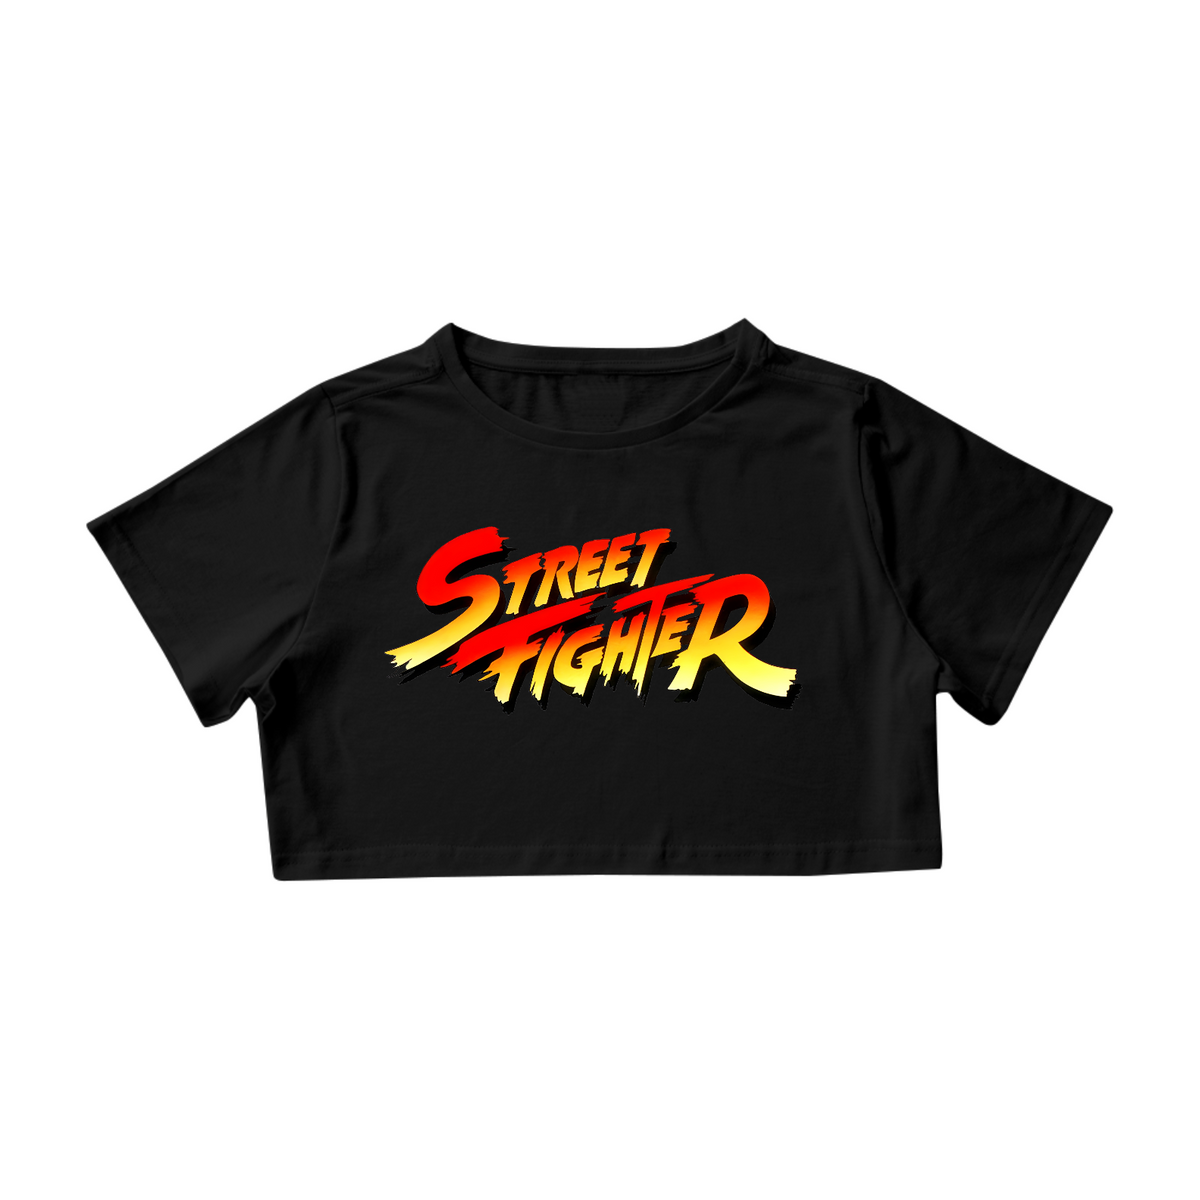 Nome do produto: Camisa Cropped - Street Fighter